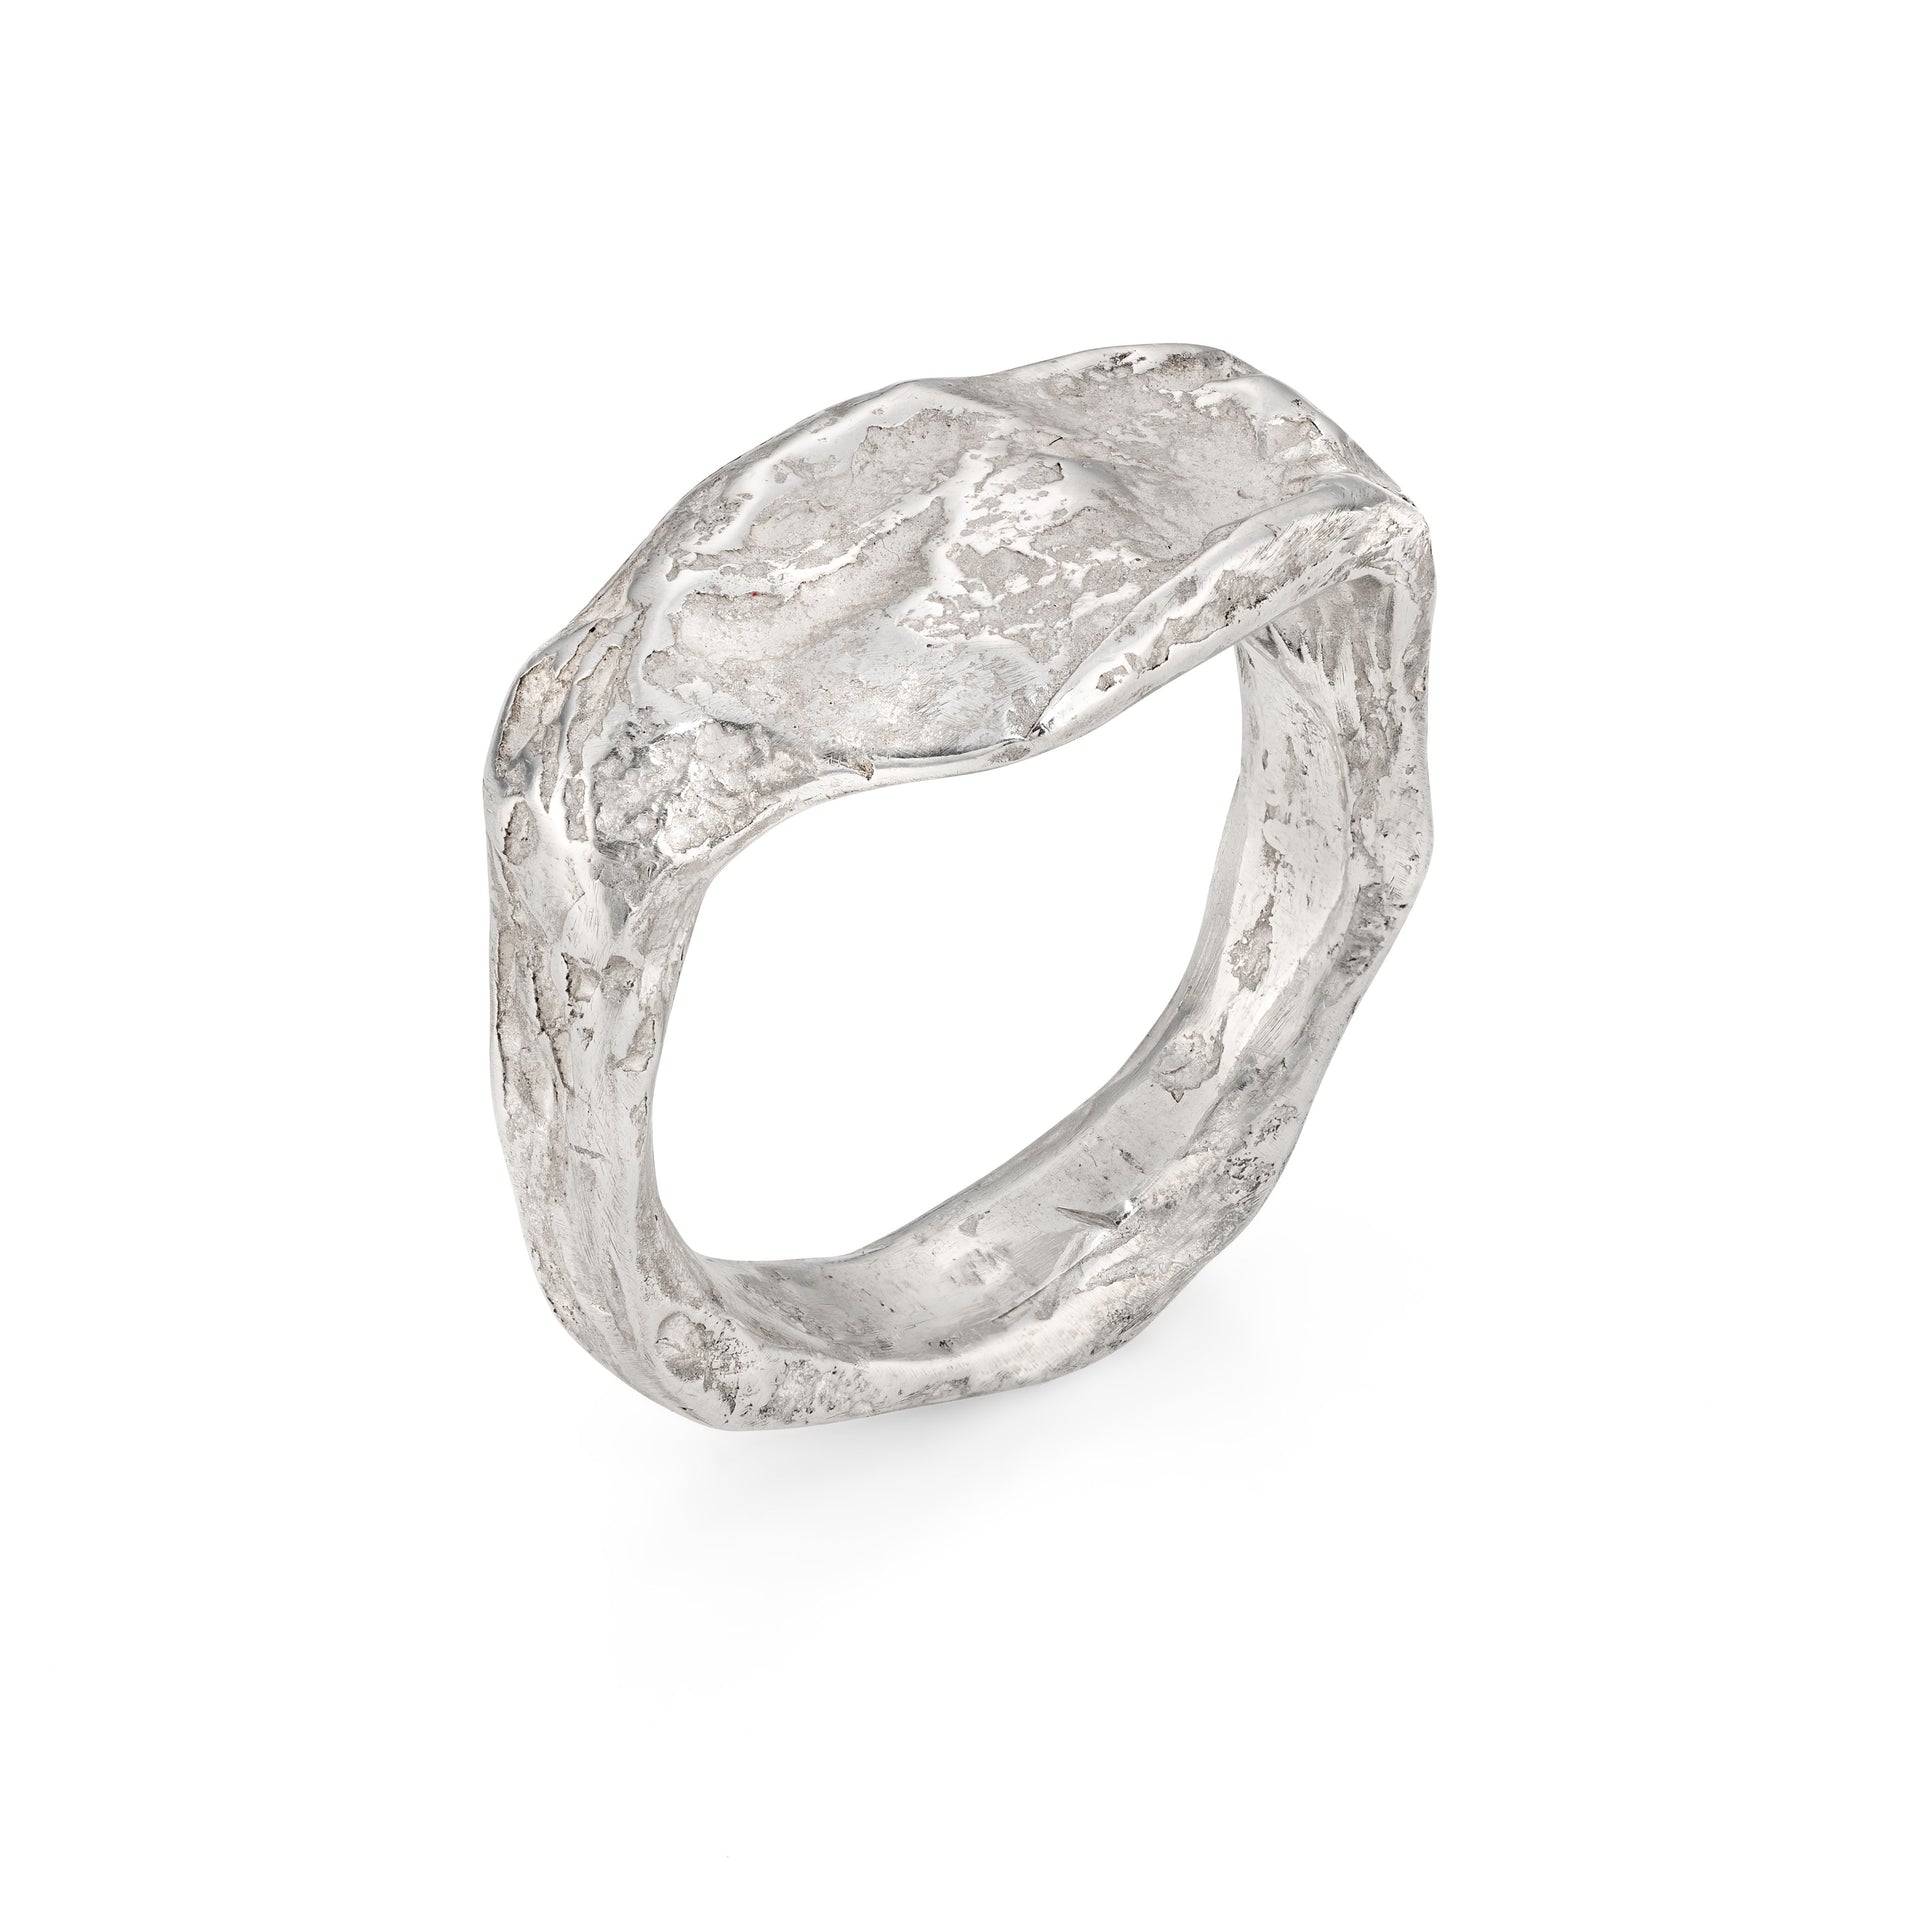 Contemporary signet ring, coastal inspired design, made in Cornwall by Emily Nixon.